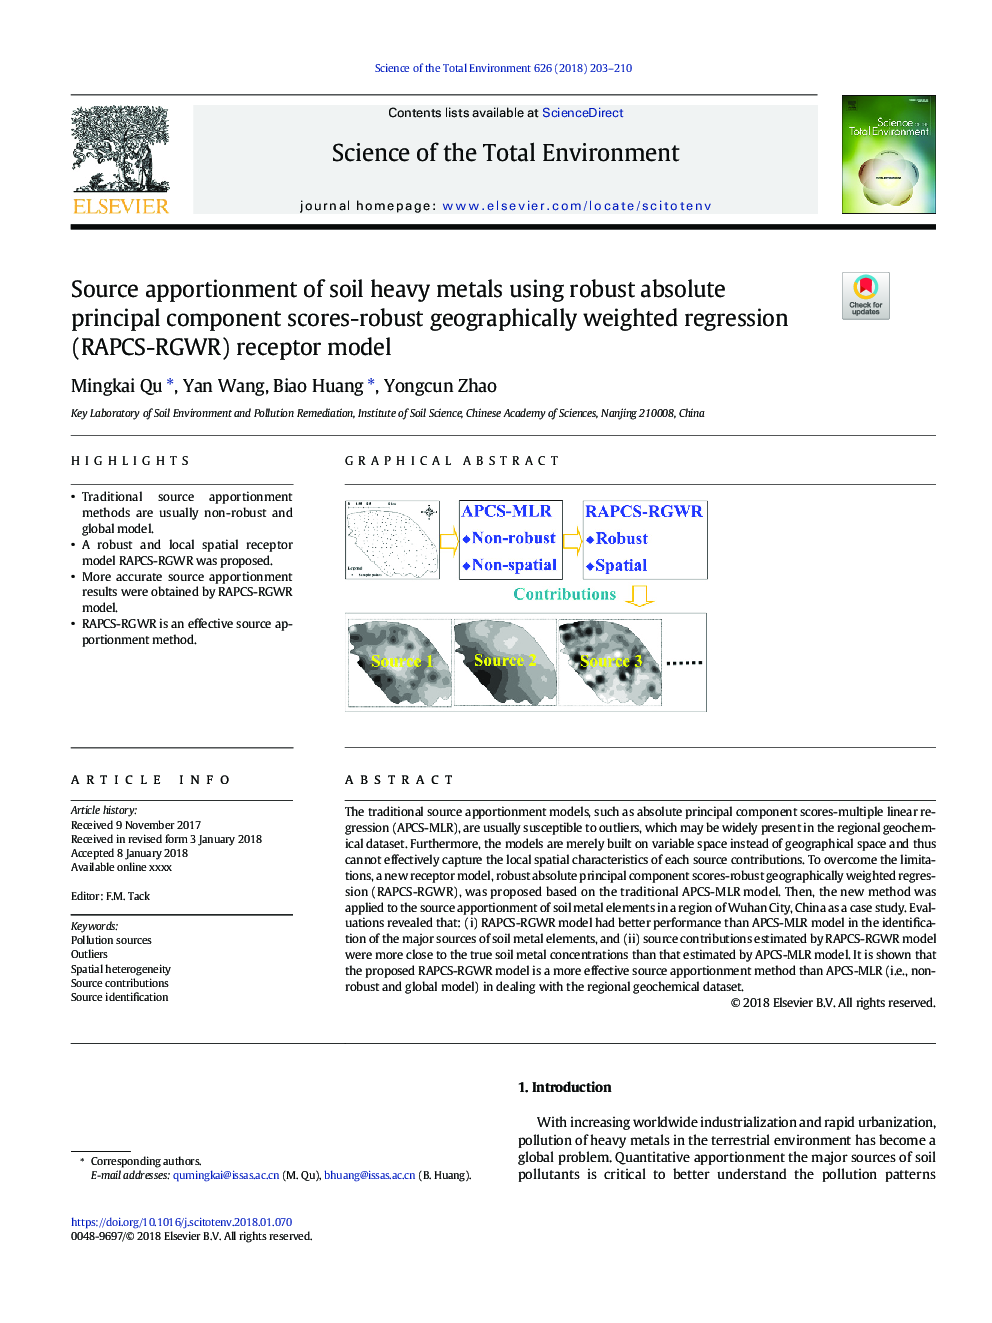 Source apportionment of soil heavy metals using robust absolute principal component scores-robust geographically weighted regression (RAPCS-RGWR) receptor model